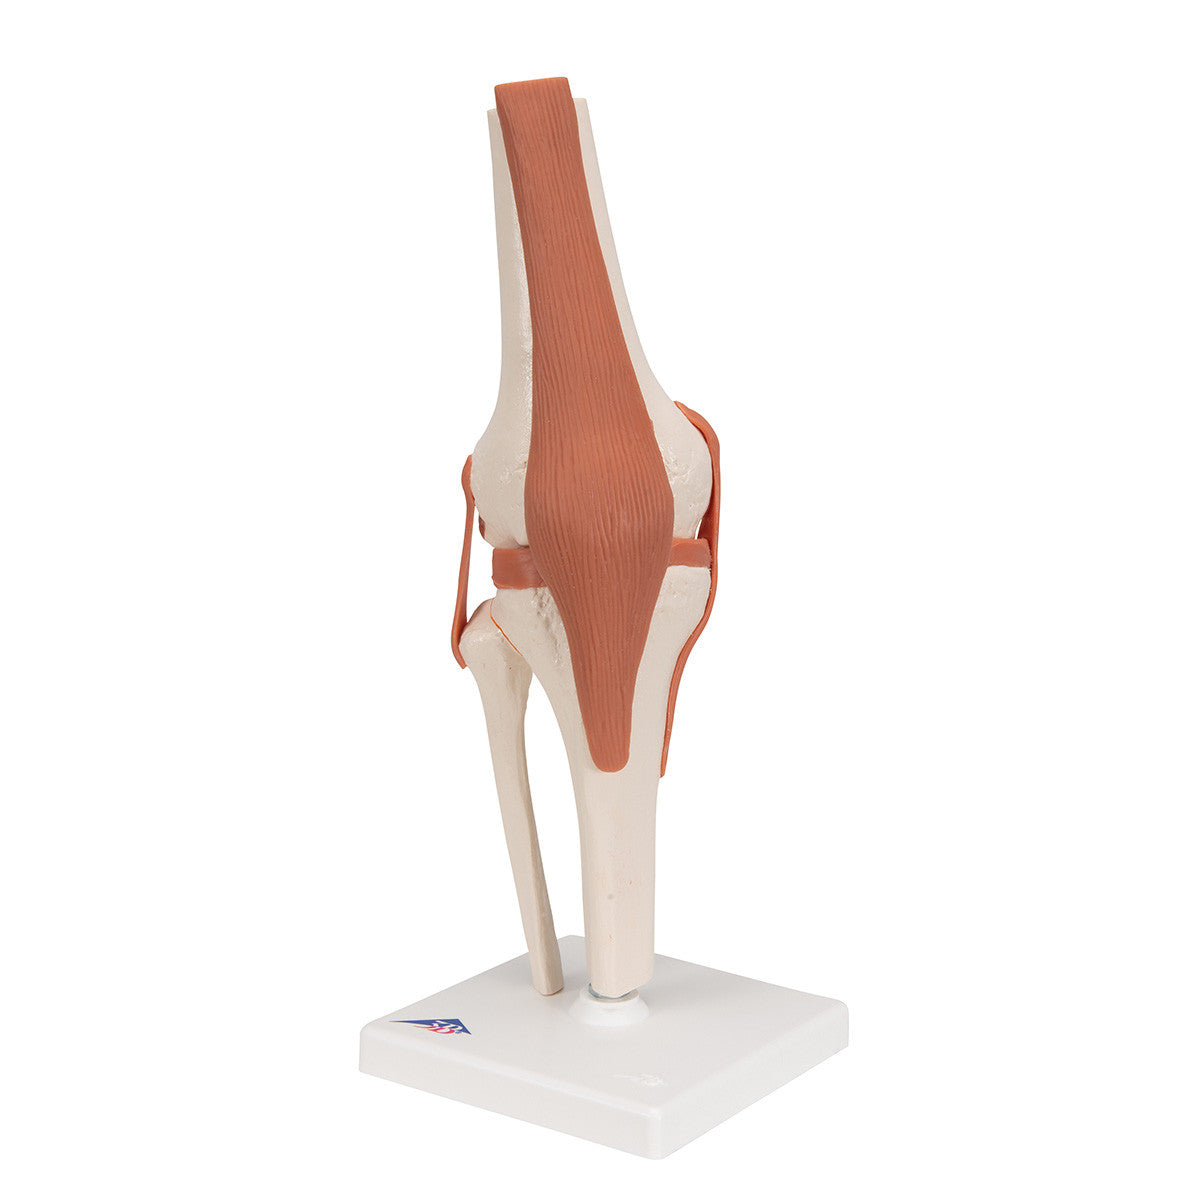 a82_05_1200_1200_functional-human-knee-joint-model-with-ligaments-3b-smart-anatomy__99354.1589753313.1280.1280.jpg